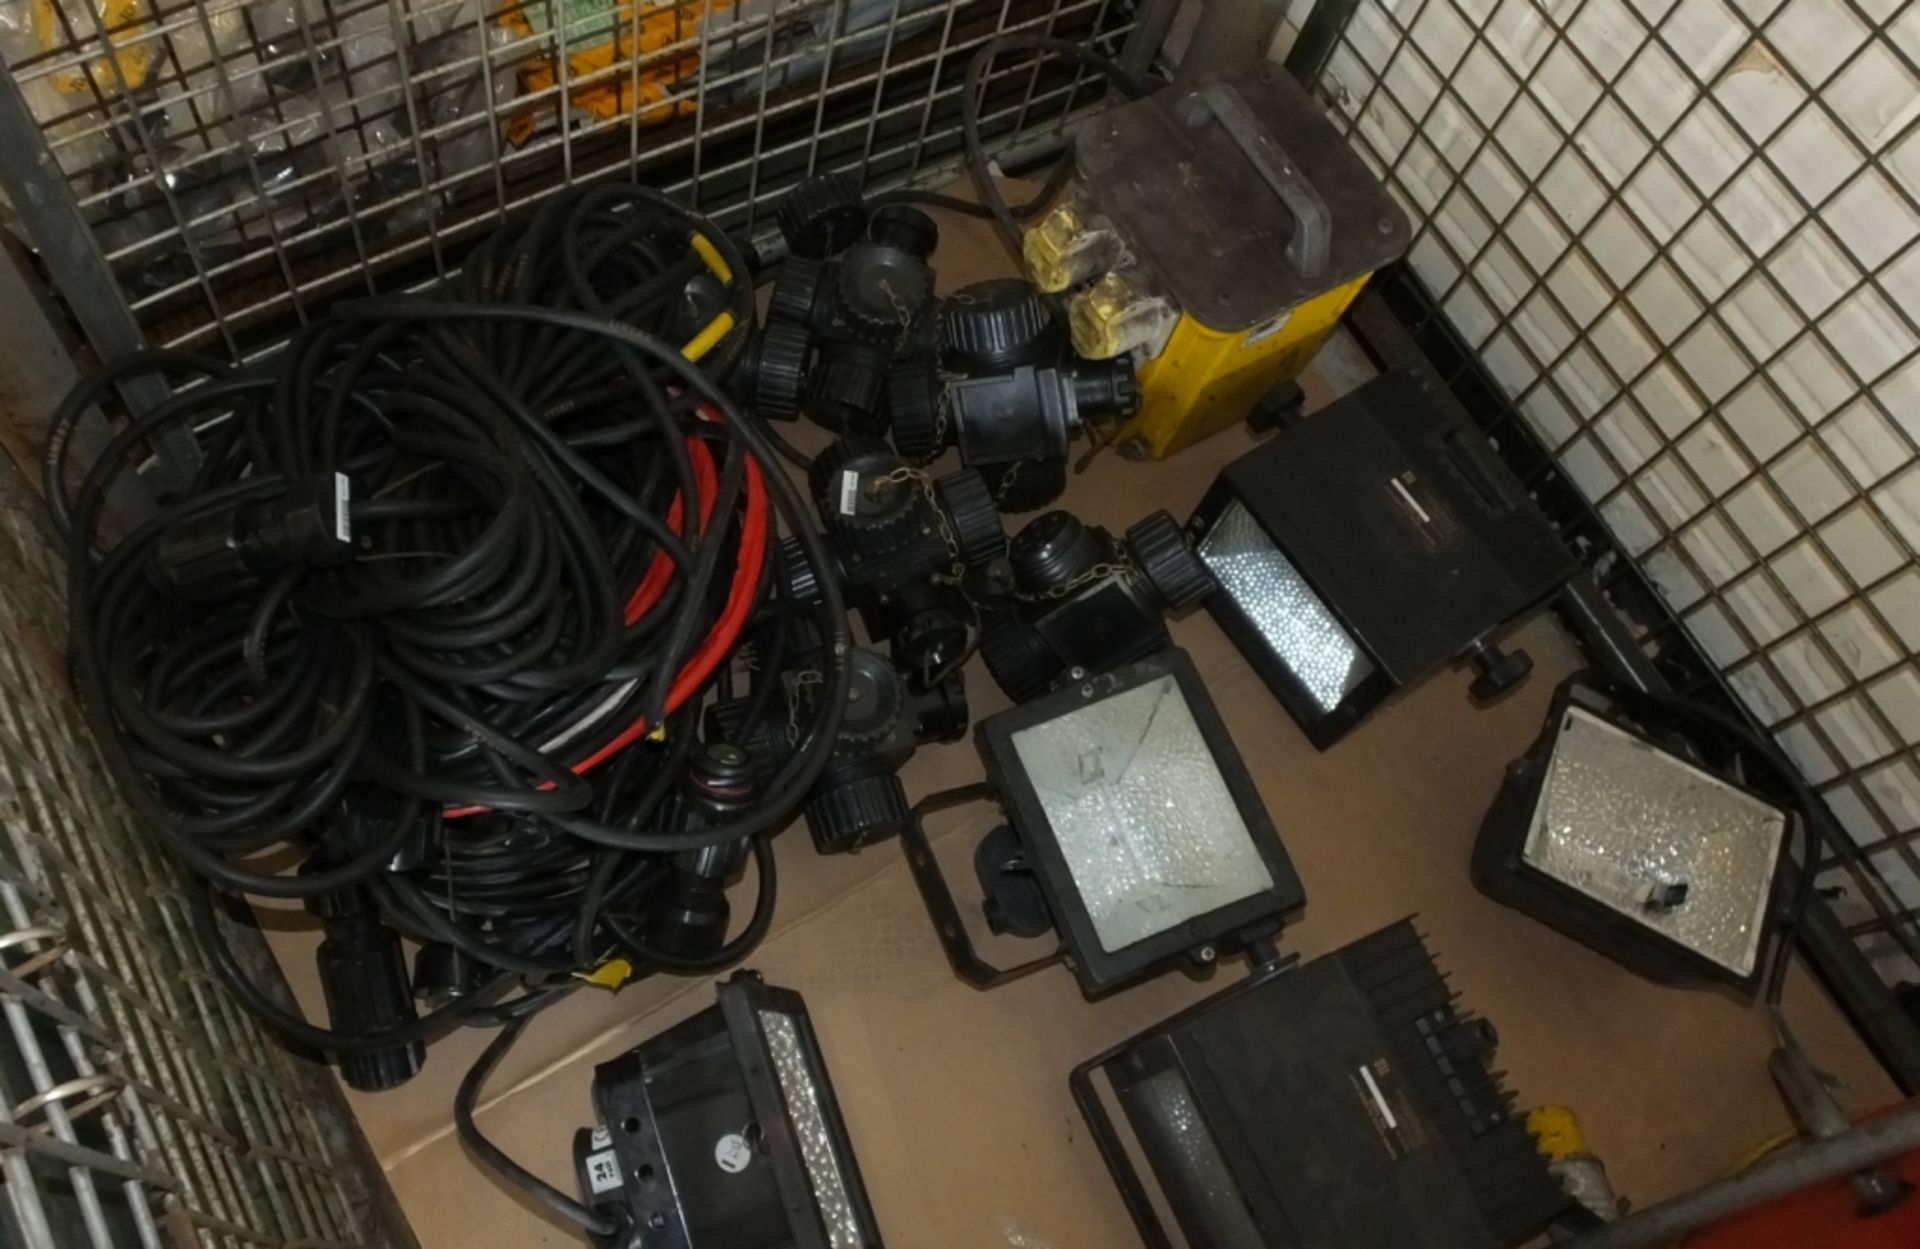 9x Extention Lead, Flood Lamp , 110V Transformer, cable assemblies, 6x 4 Way sockets - Image 3 of 4